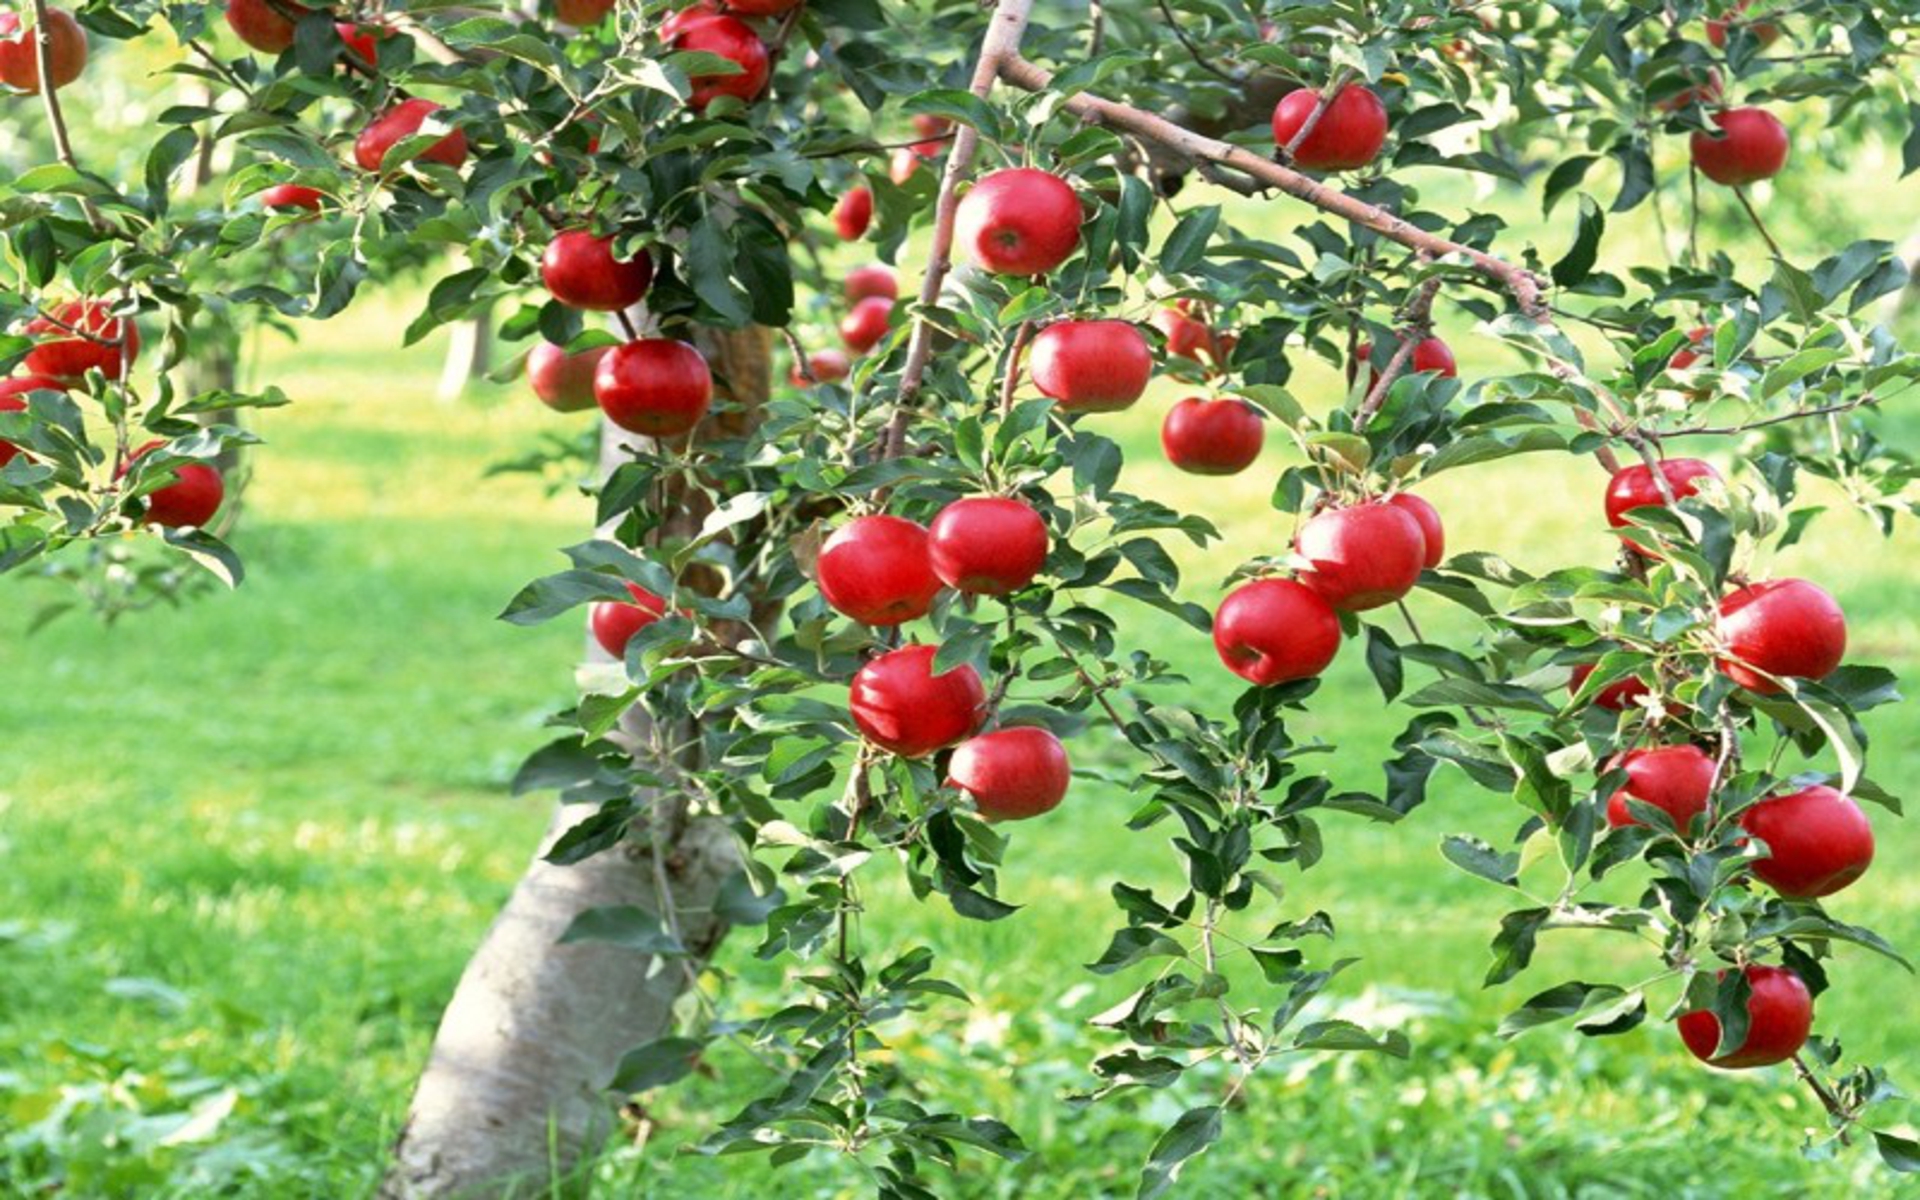 DOWNLOAD: apple-tree free picture 2560 x 1600